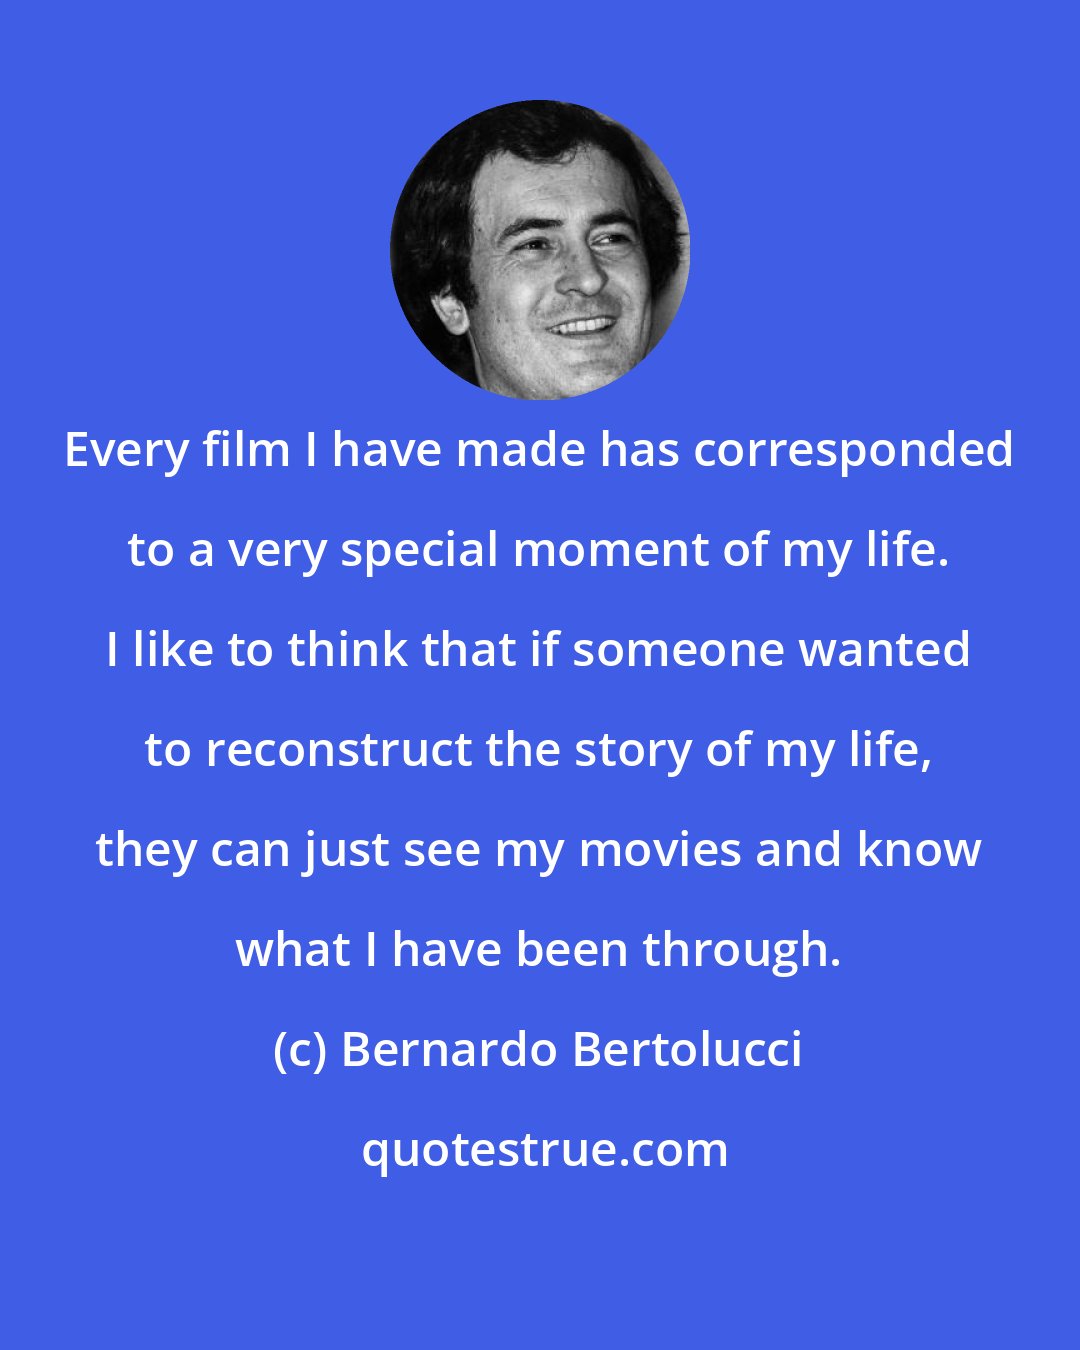 Bernardo Bertolucci: Every film I have made has corresponded to a very special moment of my life. I like to think that if someone wanted to reconstruct the story of my life, they can just see my movies and know what I have been through.